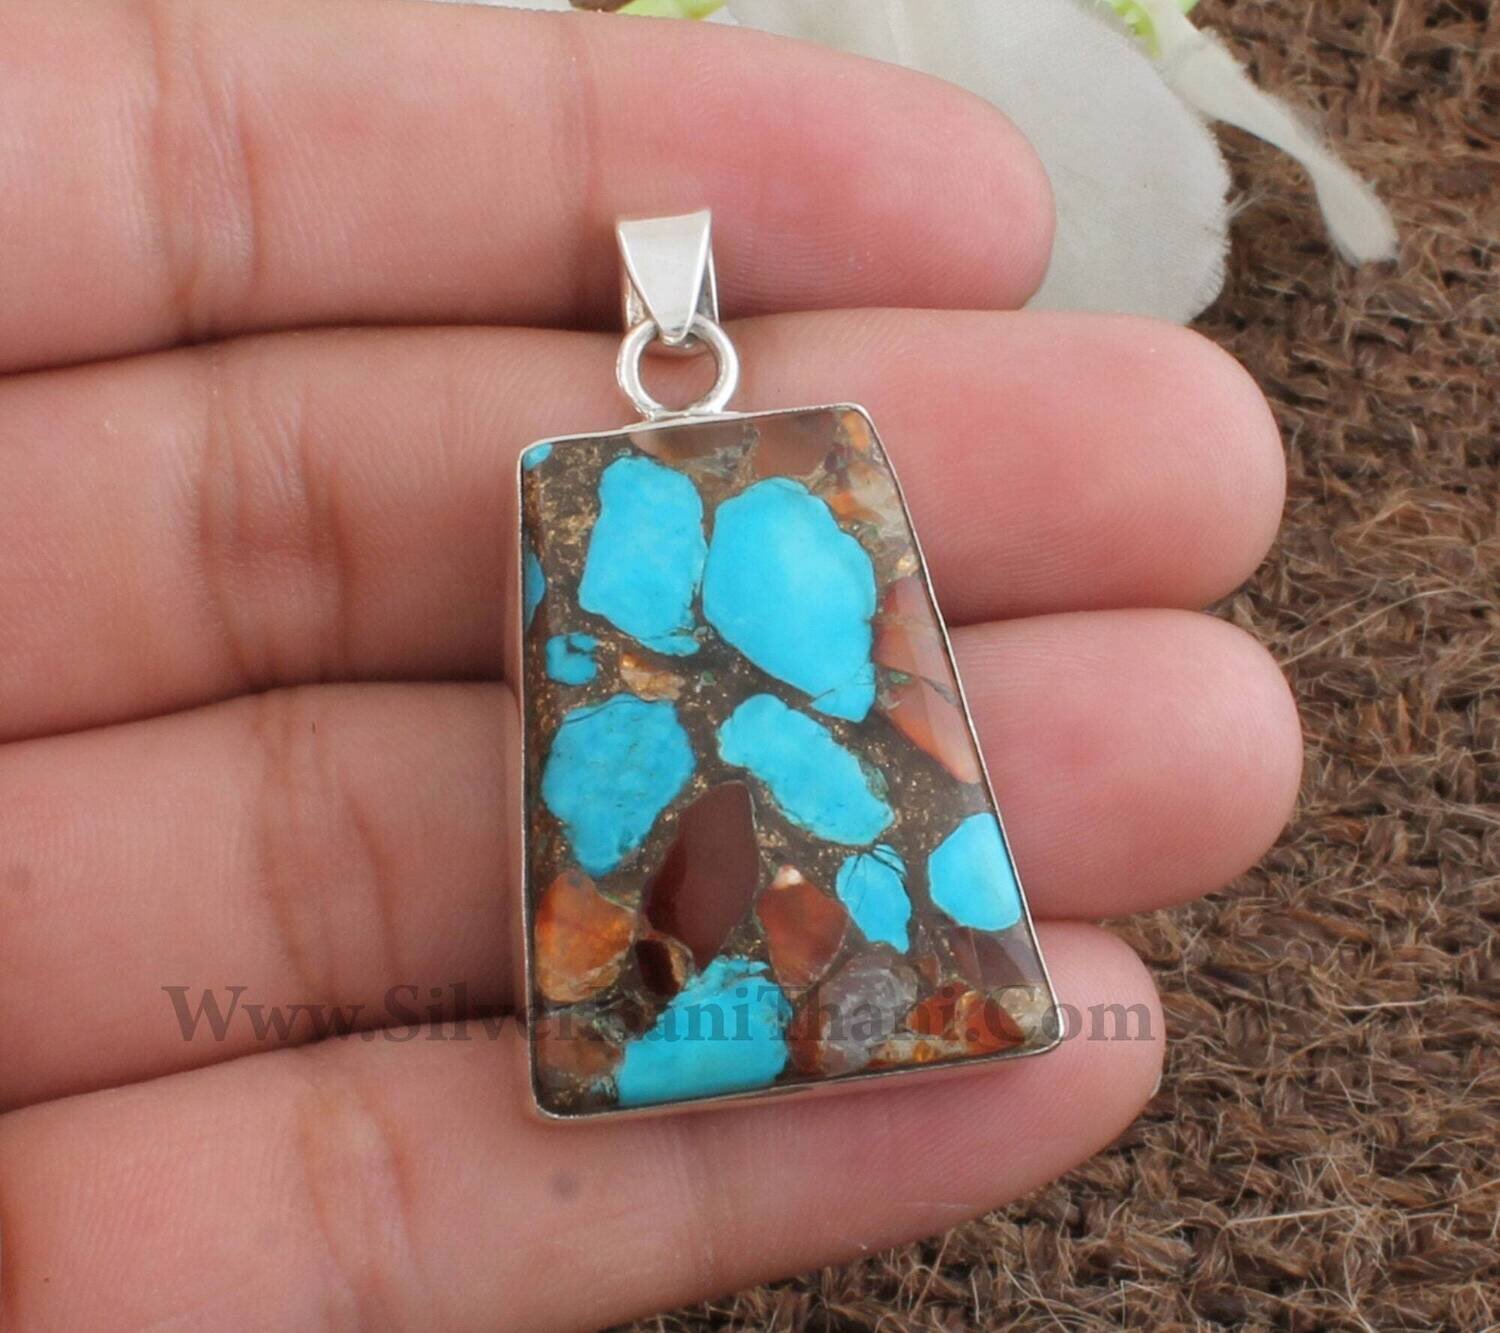 Composite Turquoise Gemstone Silver Necklace Pendant | 925 Sterling Silver Trapezoid Shape Stone Pendant| Handmade Jewelry Boho Jewelry Gift